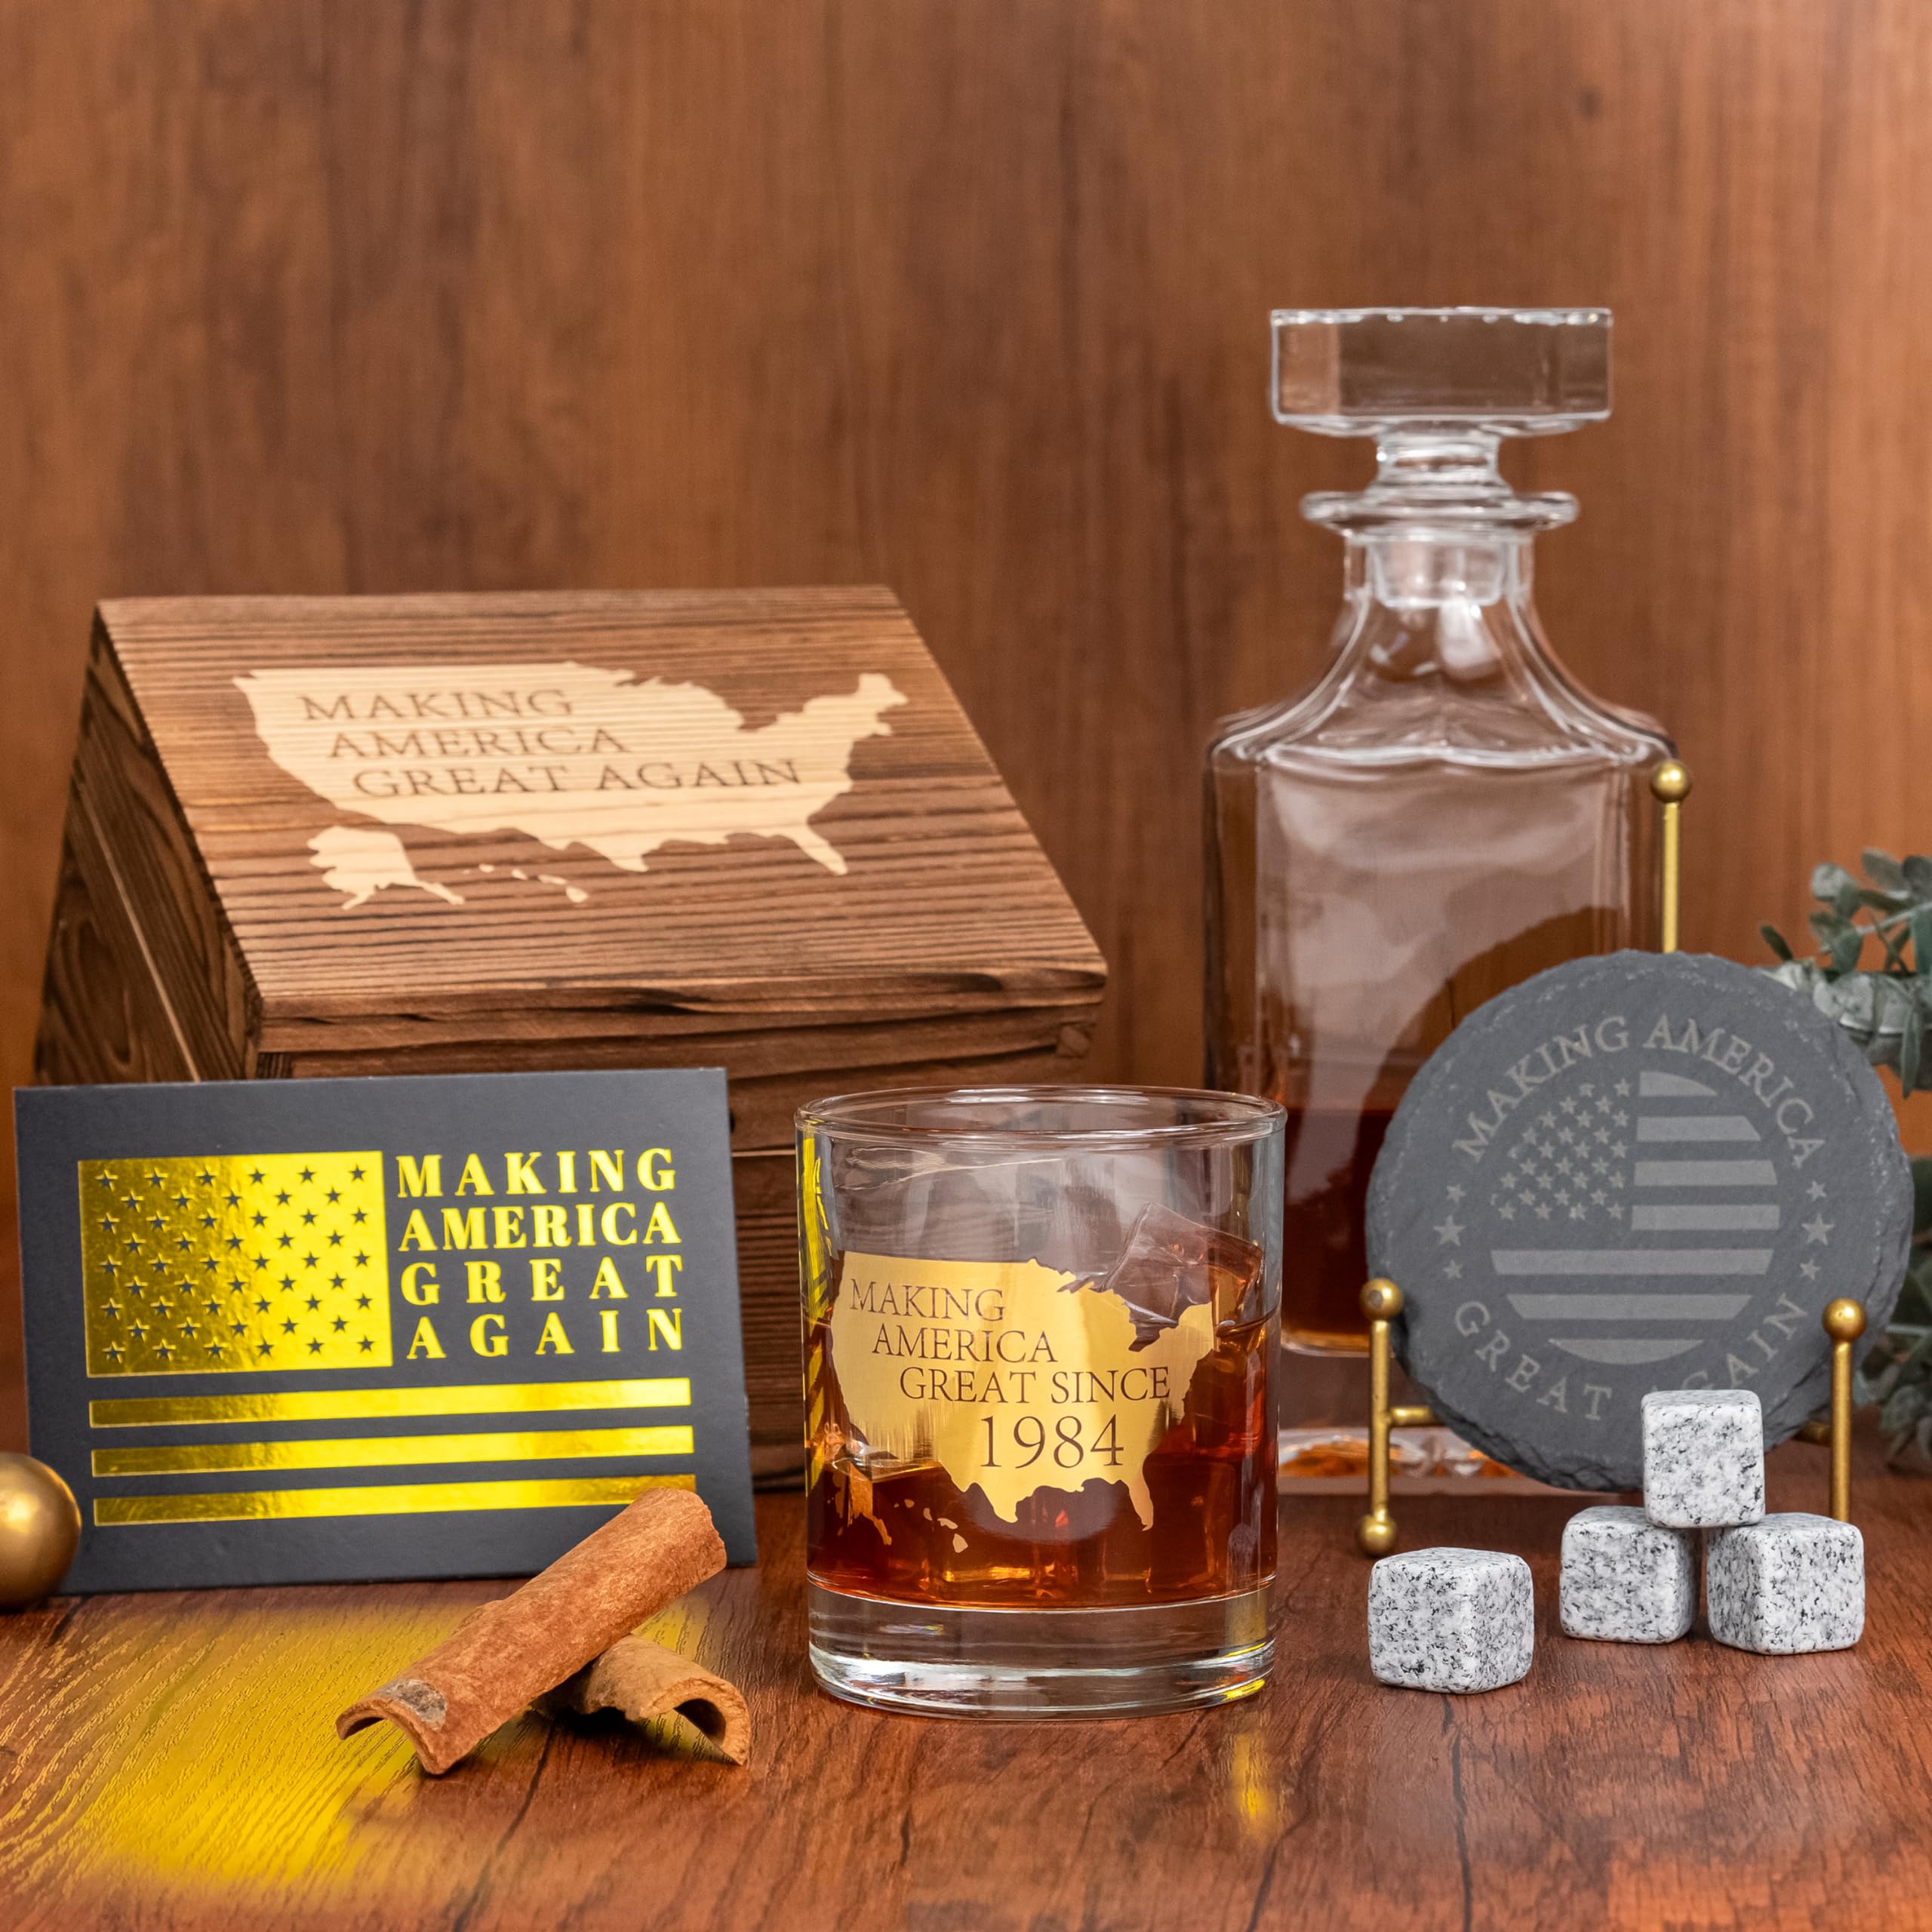 Crisky 40th Birthday Bourbon Whiskey Glass & Stones 40th Birthday Gift for Men Making XX Great Since 1984 Includes One Crystal Whisky Glass, 4 Chilling Stones, 1 Slate Coaster in Luxury Wooden Box